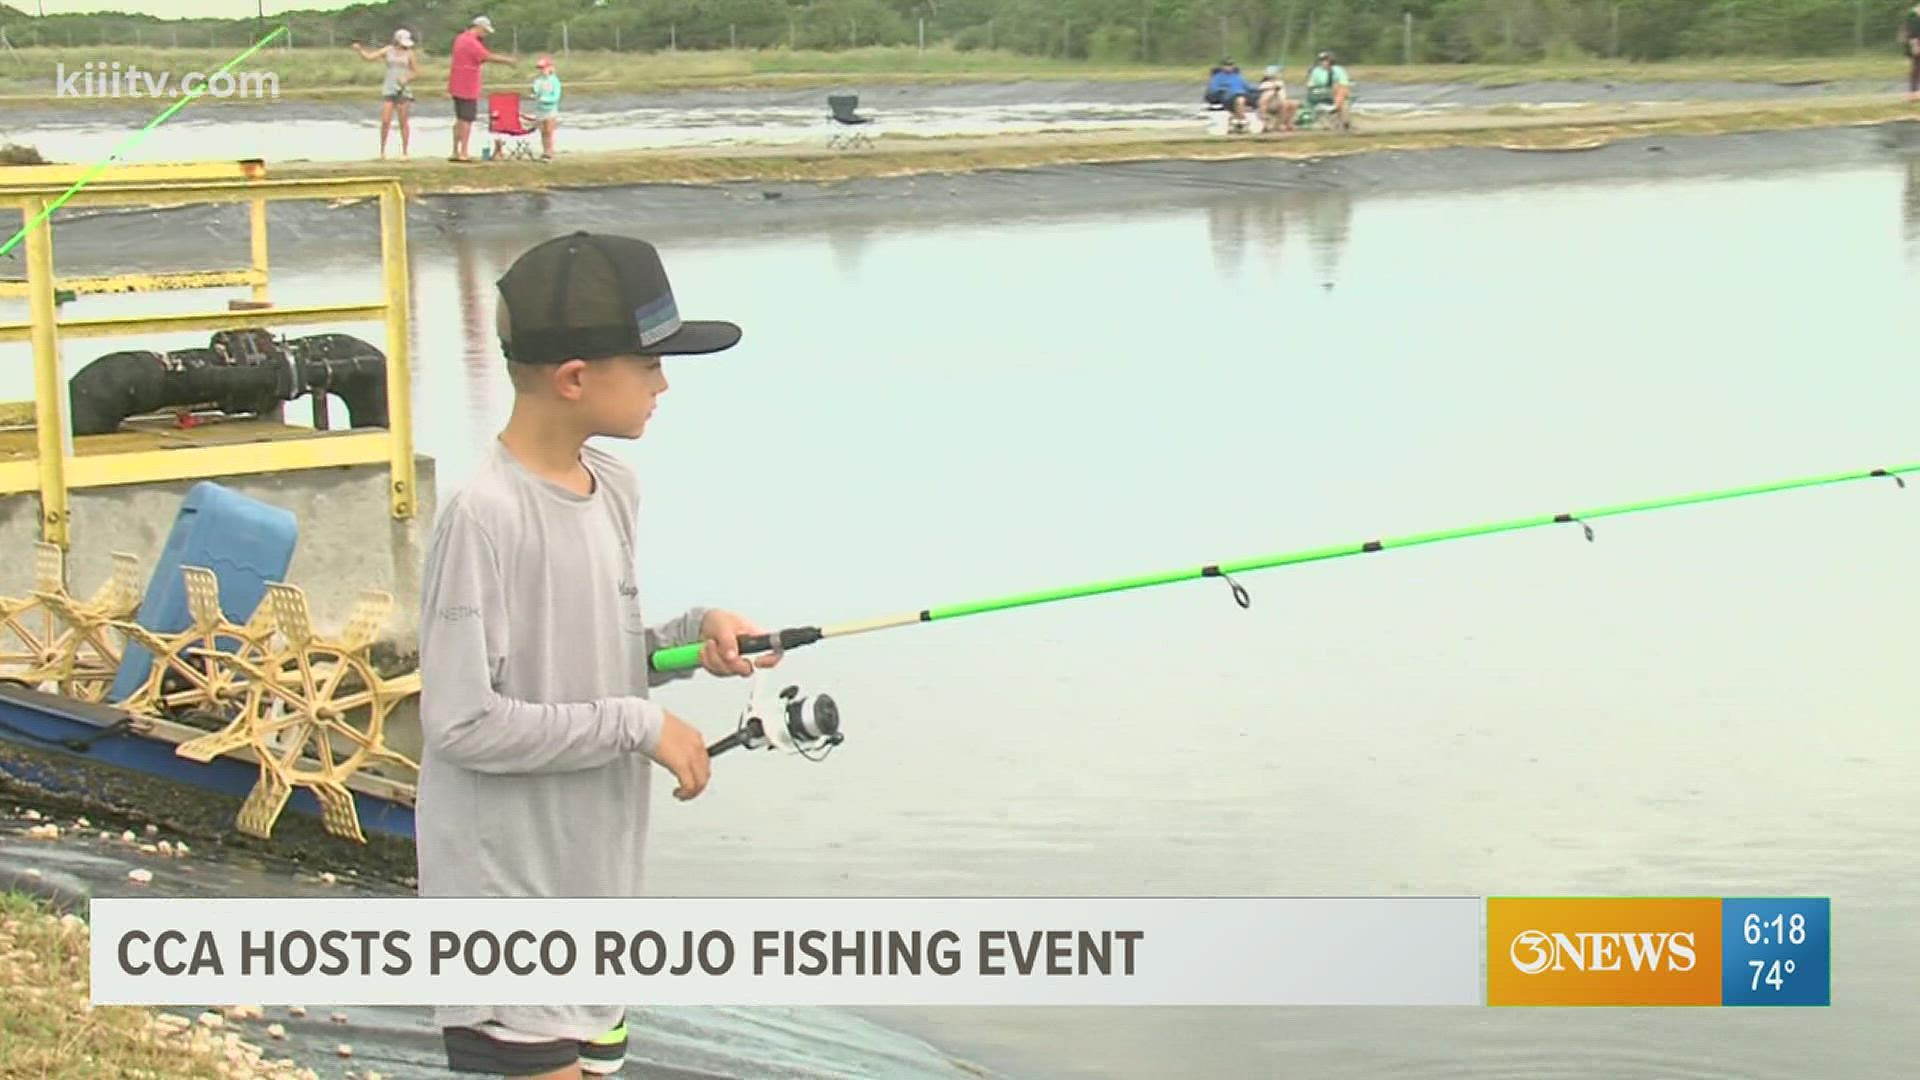 The event was hosted to not only show kids and families how to fish, but how to appreciate wildlife in the Coastal Bend.